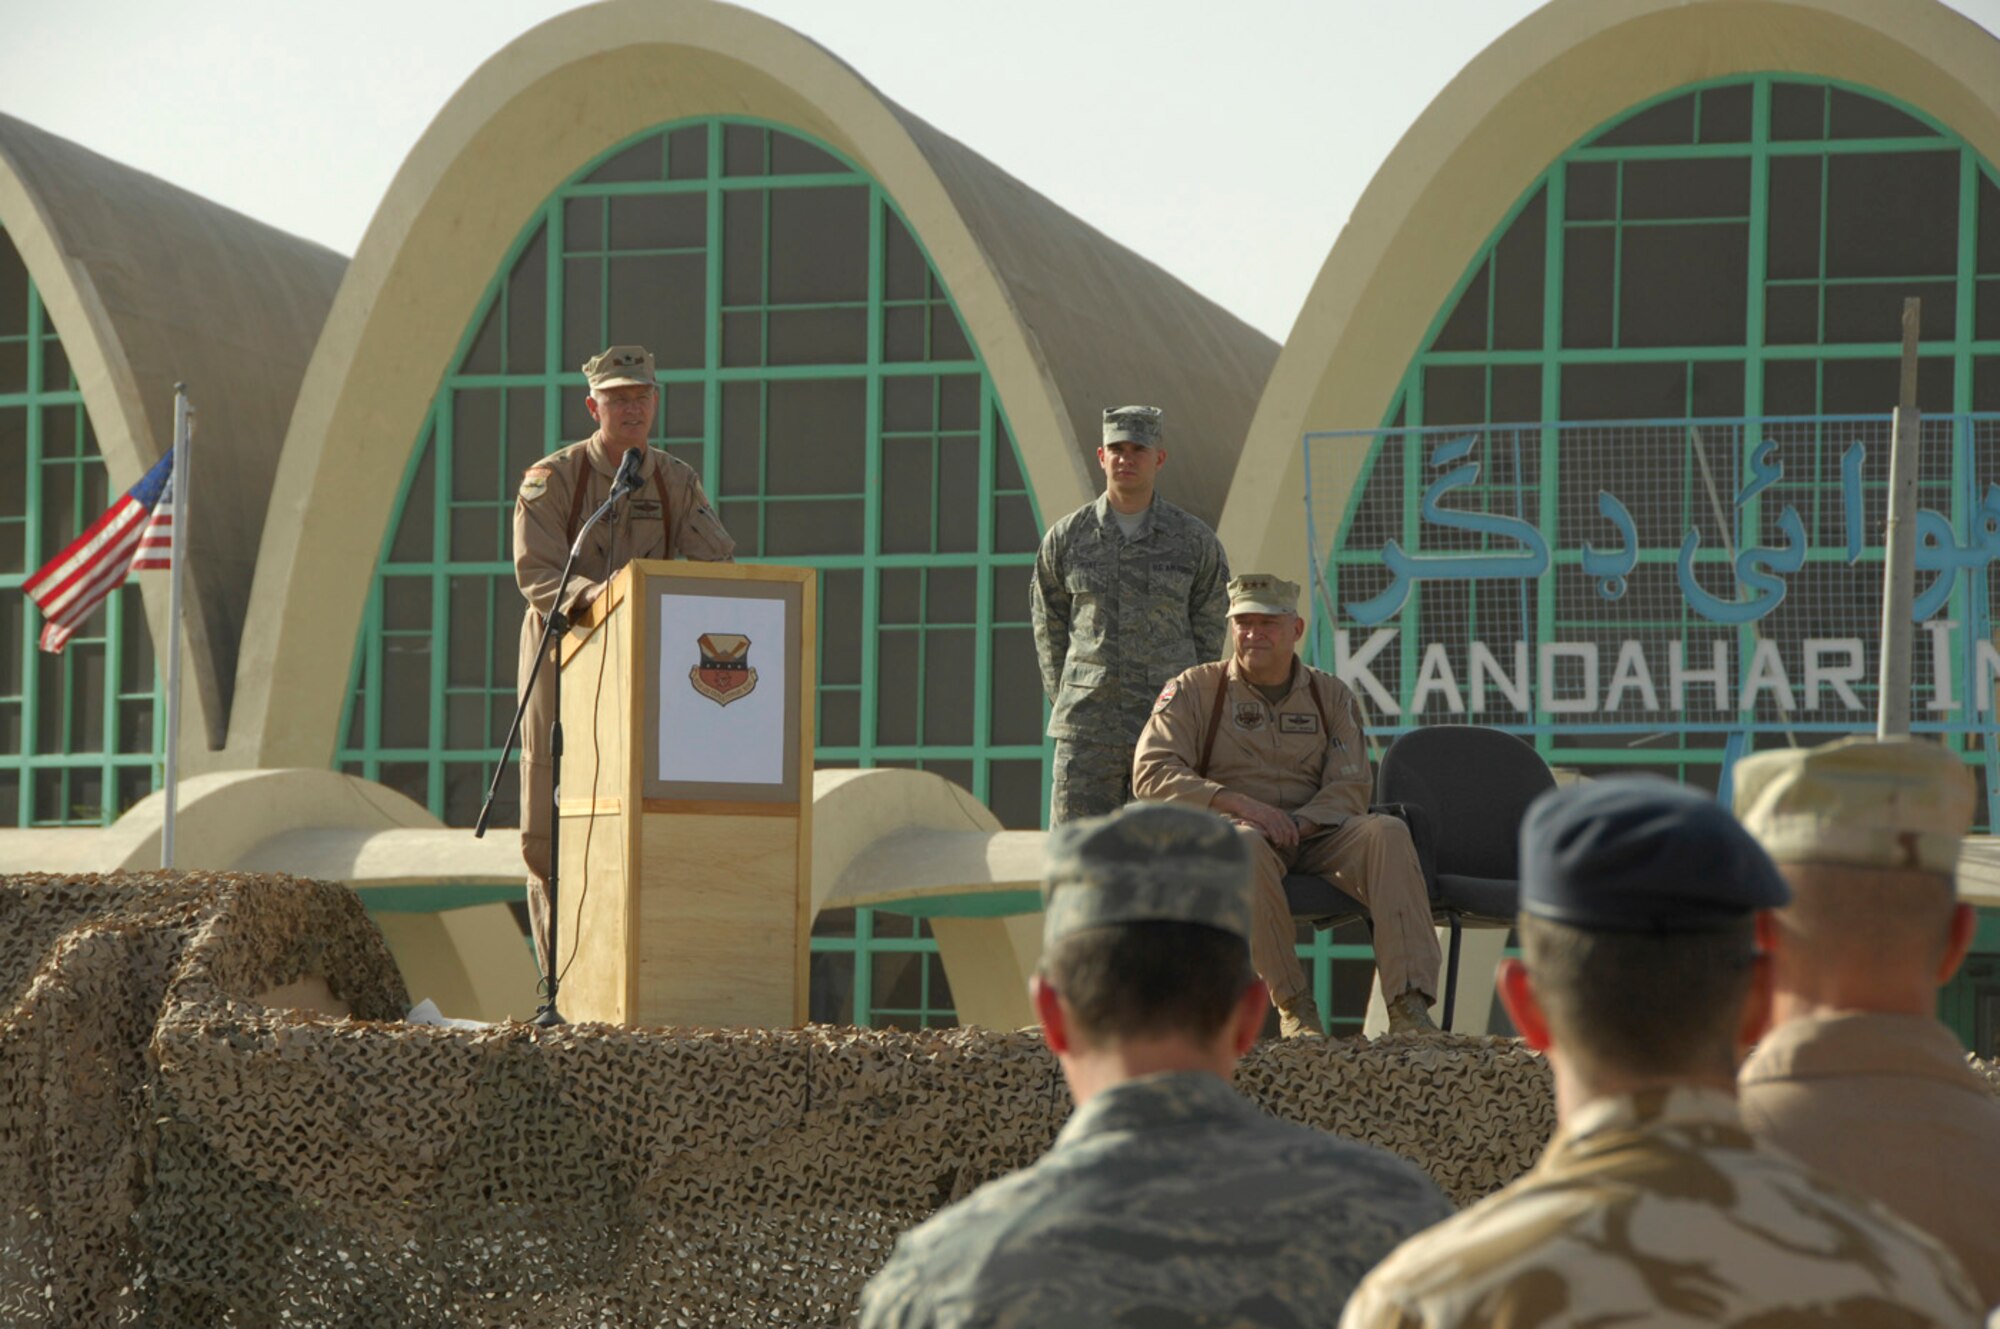 ANDAHAR AIRFIELD, Afghanistan - Brig. Gen. Guy M. Walsh addresses 451st Airmen, distinguished visitors and coalition partners as the new Wing commander for the 451st Air Expeditionary Wing here after an assumption of command and activation ceremony July 2, 2009.  The 451st transitioned from a group to a wing at 7 a.m. as Lt. Gen. Gary L. North, 9th Air Force and U.S. Air Forces Central commander, handed Gen. Walsh the guidon.  General Walsh was the wing commander for the 175th Wing, Maryland Air National Guard before accepting his assignment here.  (U.S. Air Force photo by 1st Lt. Noelle Caldwell)